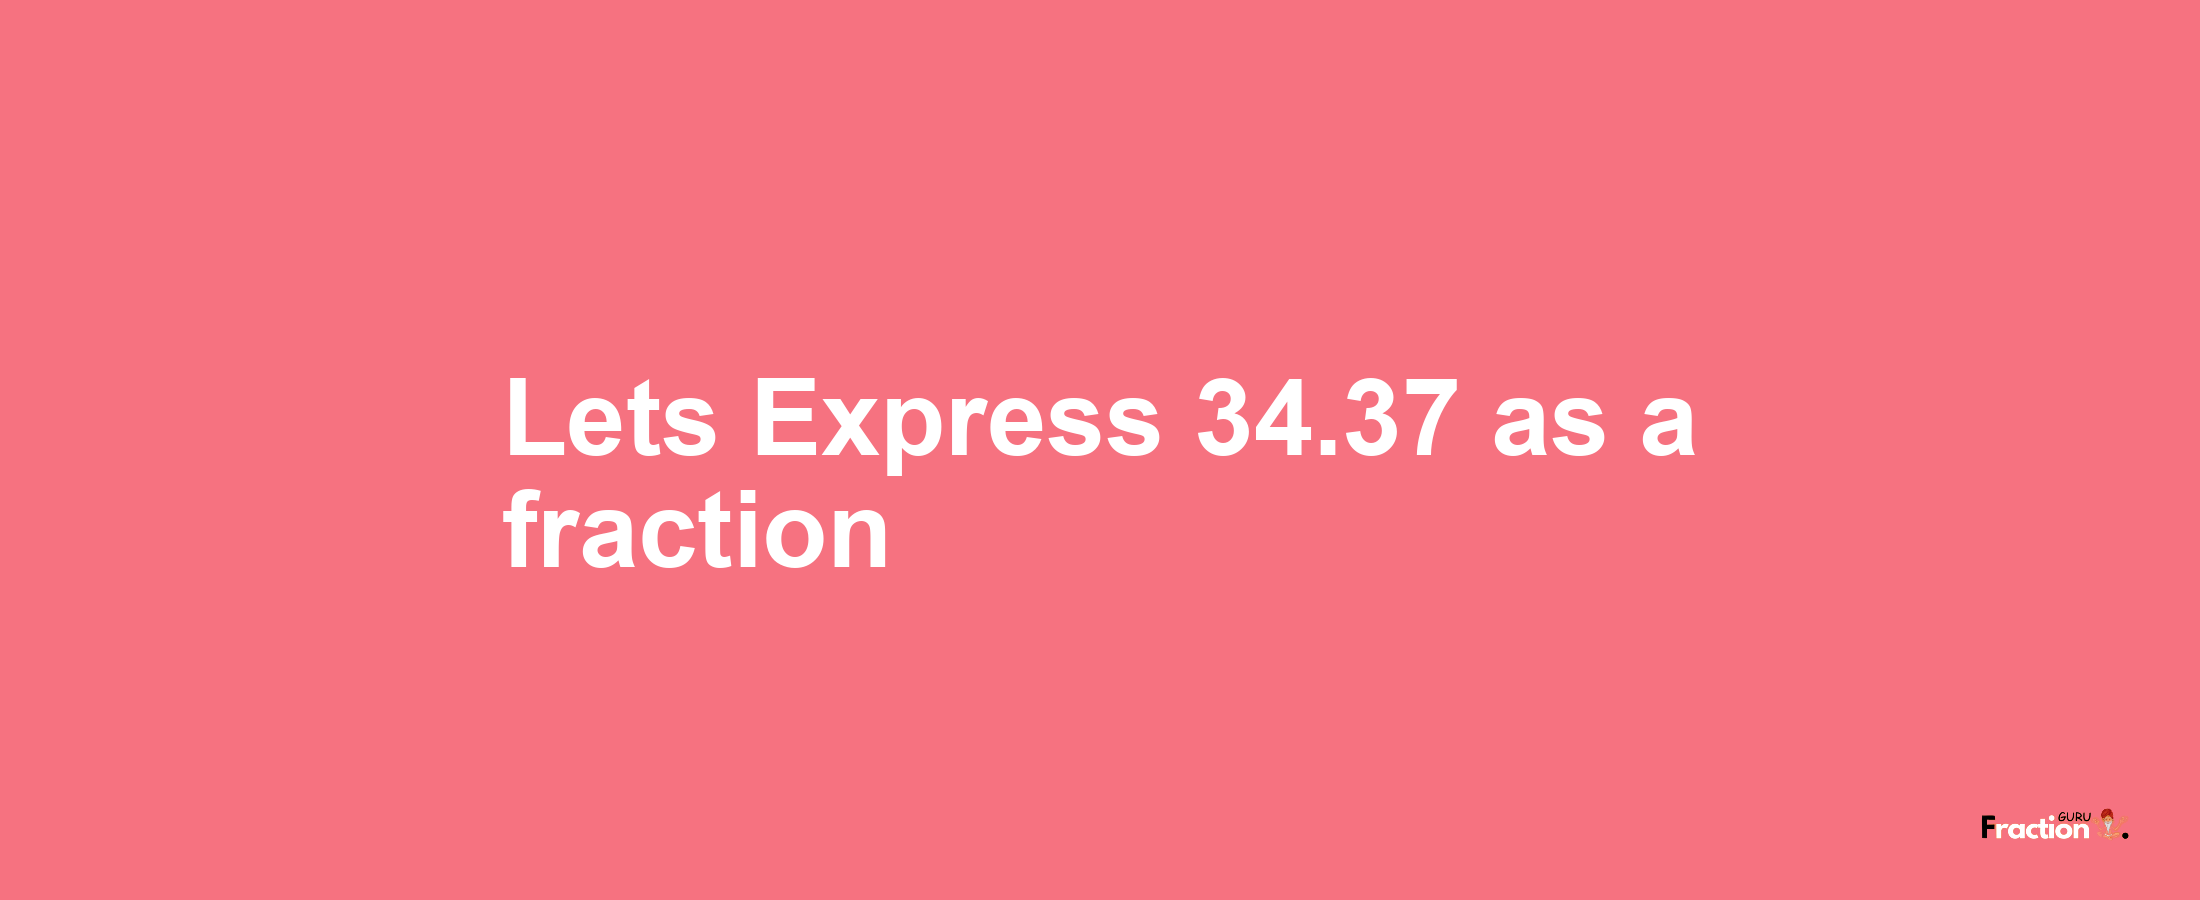 Lets Express 34.37 as afraction